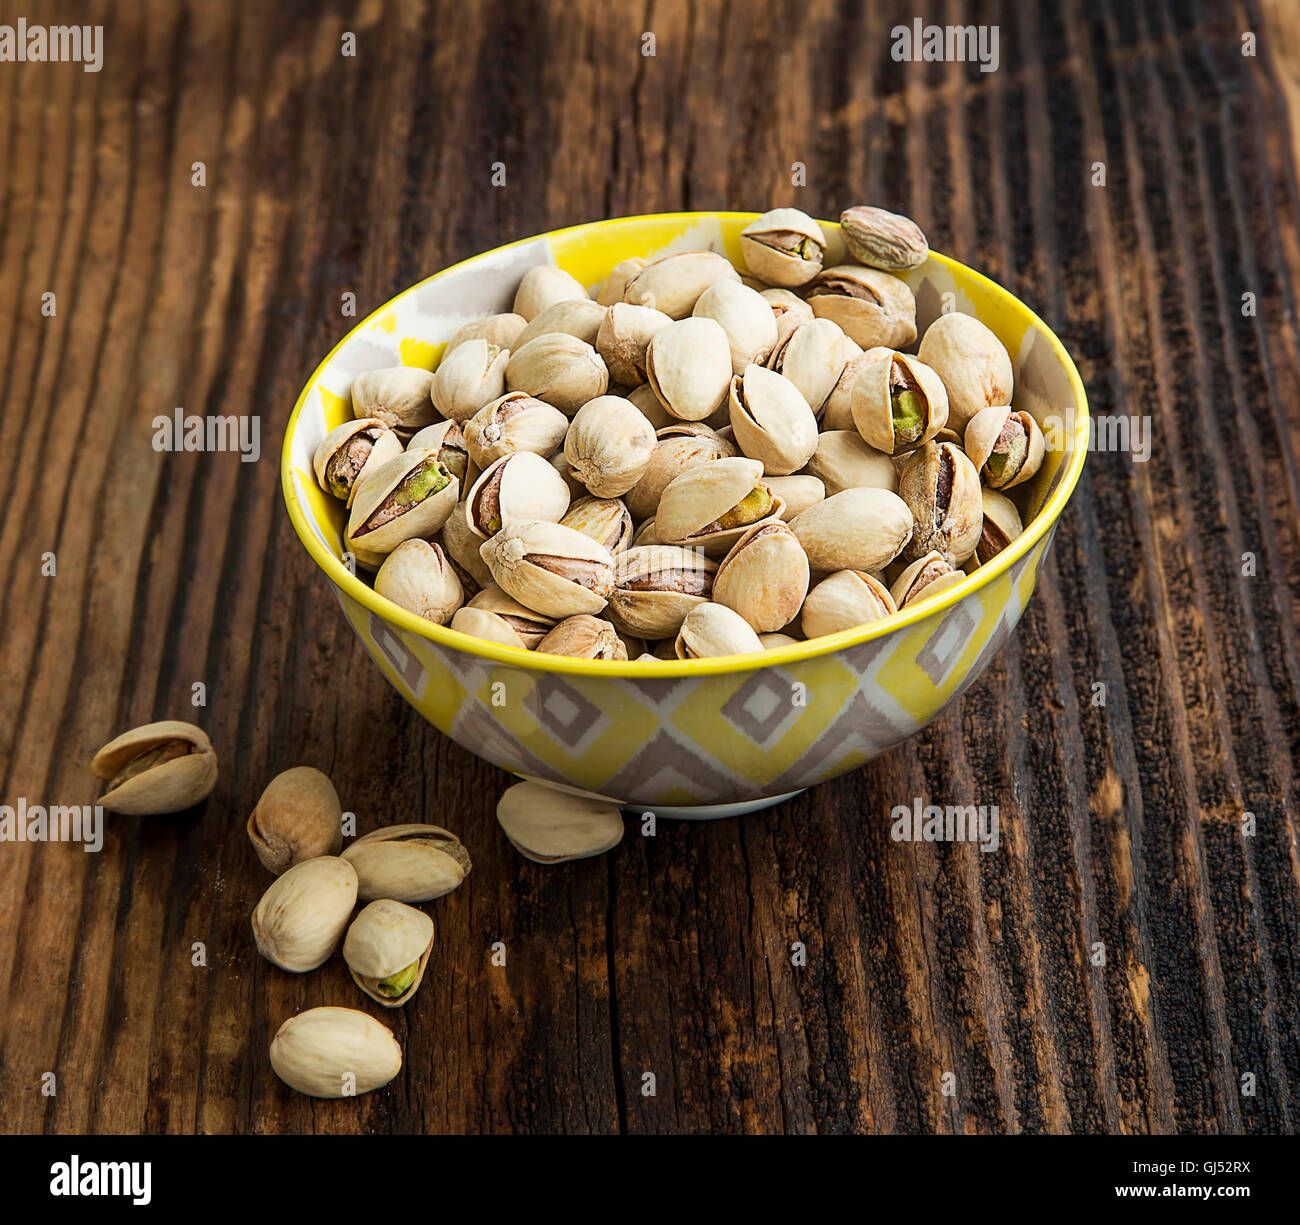 Bowl of pistachio nuts, healthy fresh nuts Stock Photo